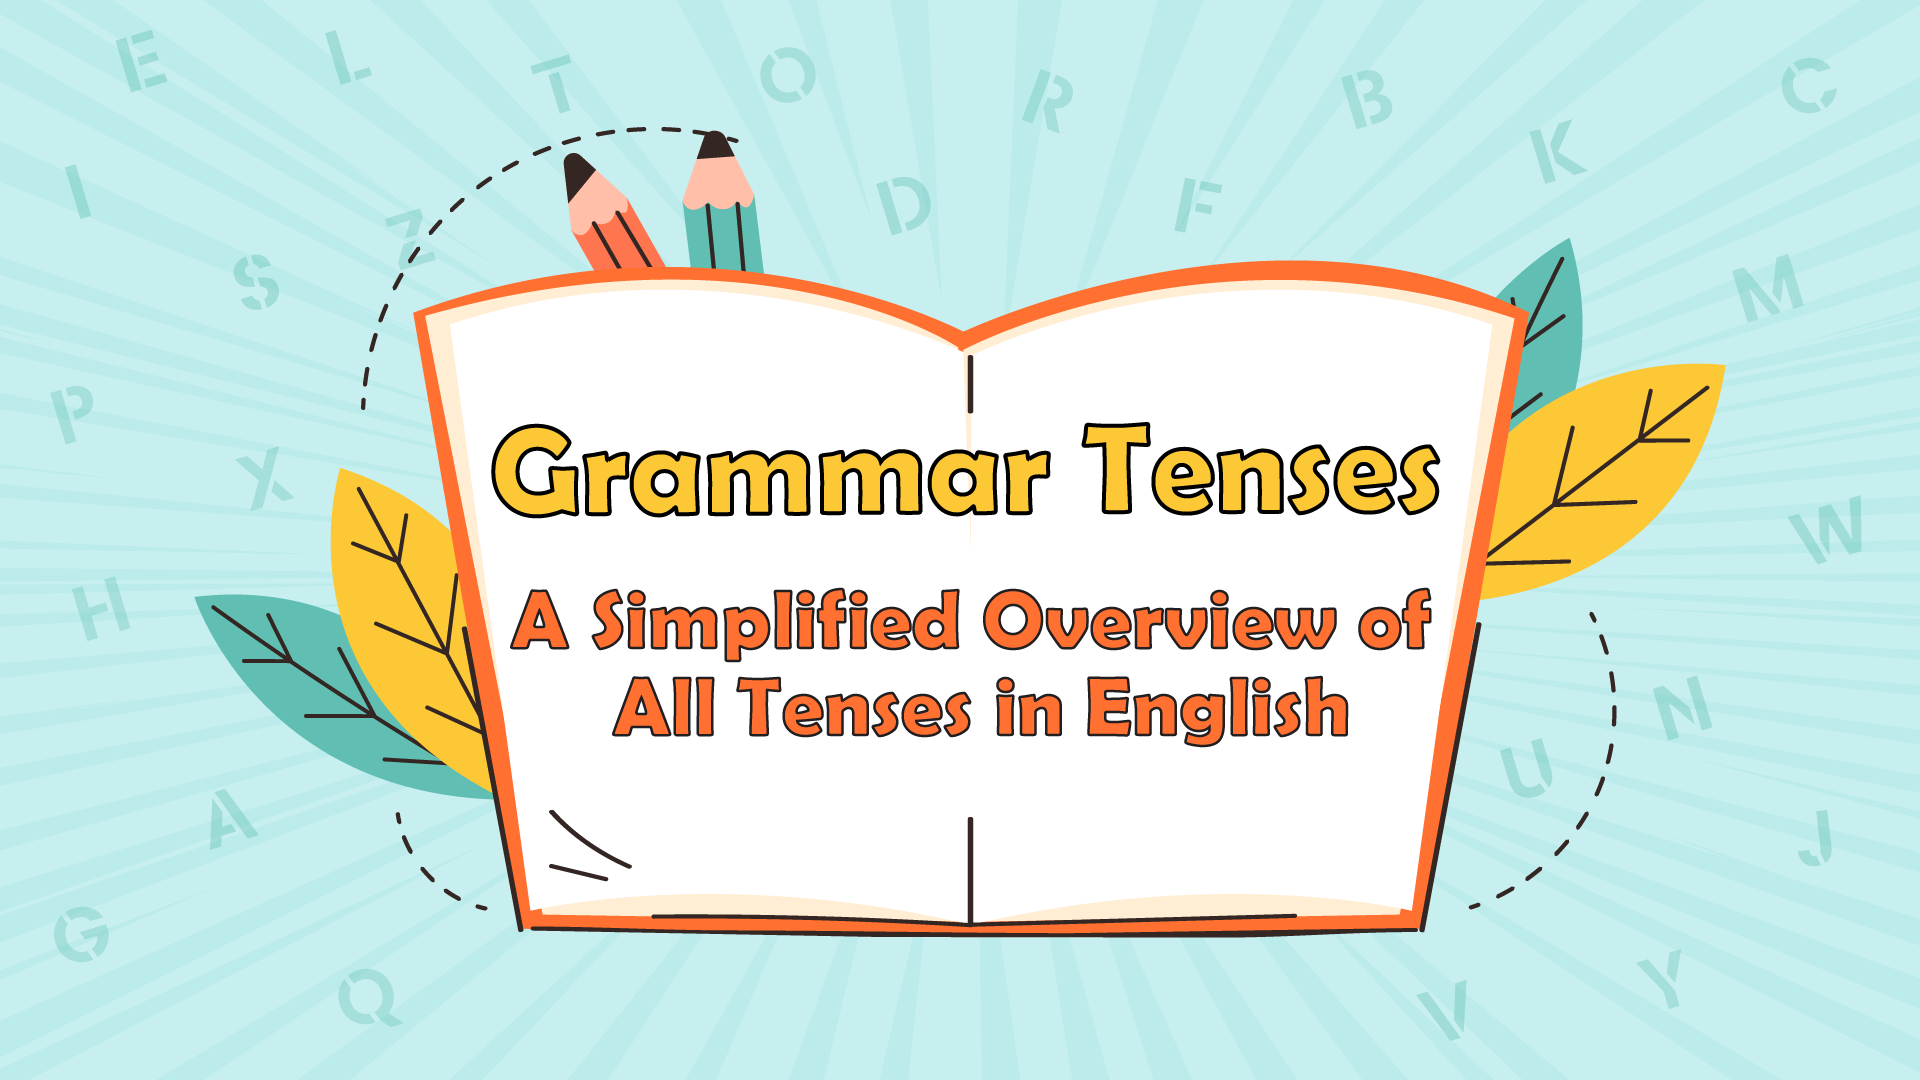 Grammar Tenses: A Simplified Overview of All Tenses in English